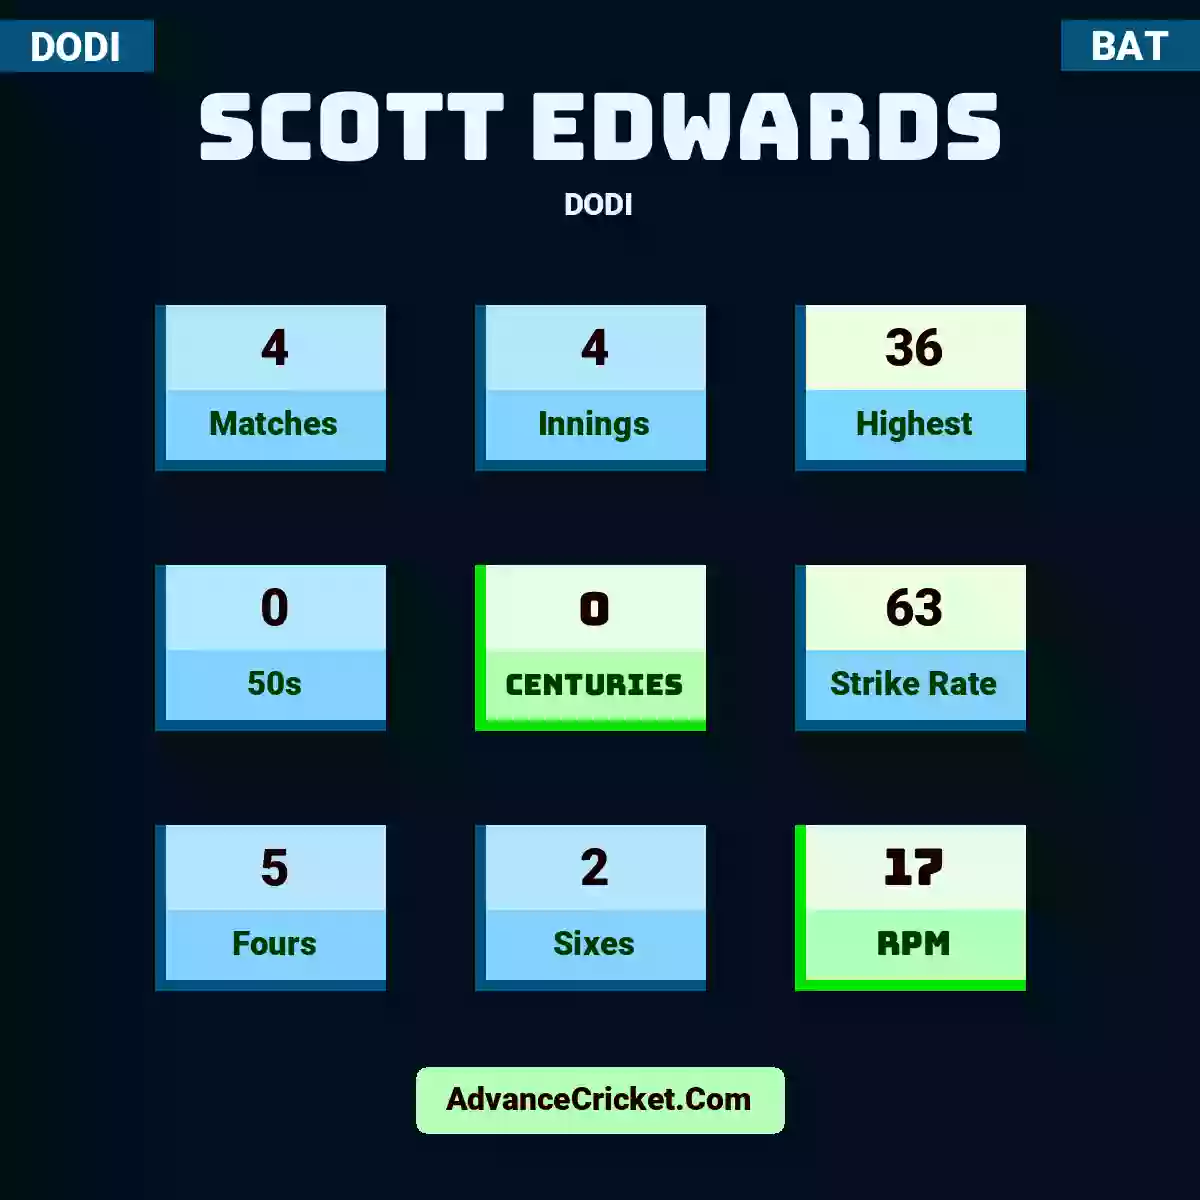 Scott Edwards DODI , Scott Edwards played 4 matches, scored 36 runs as highest, 0 half-centuries, and 0 centuries, with a strike rate of 63. S.Edwards hit 5 fours and 2 sixes, with an RPM of 17.